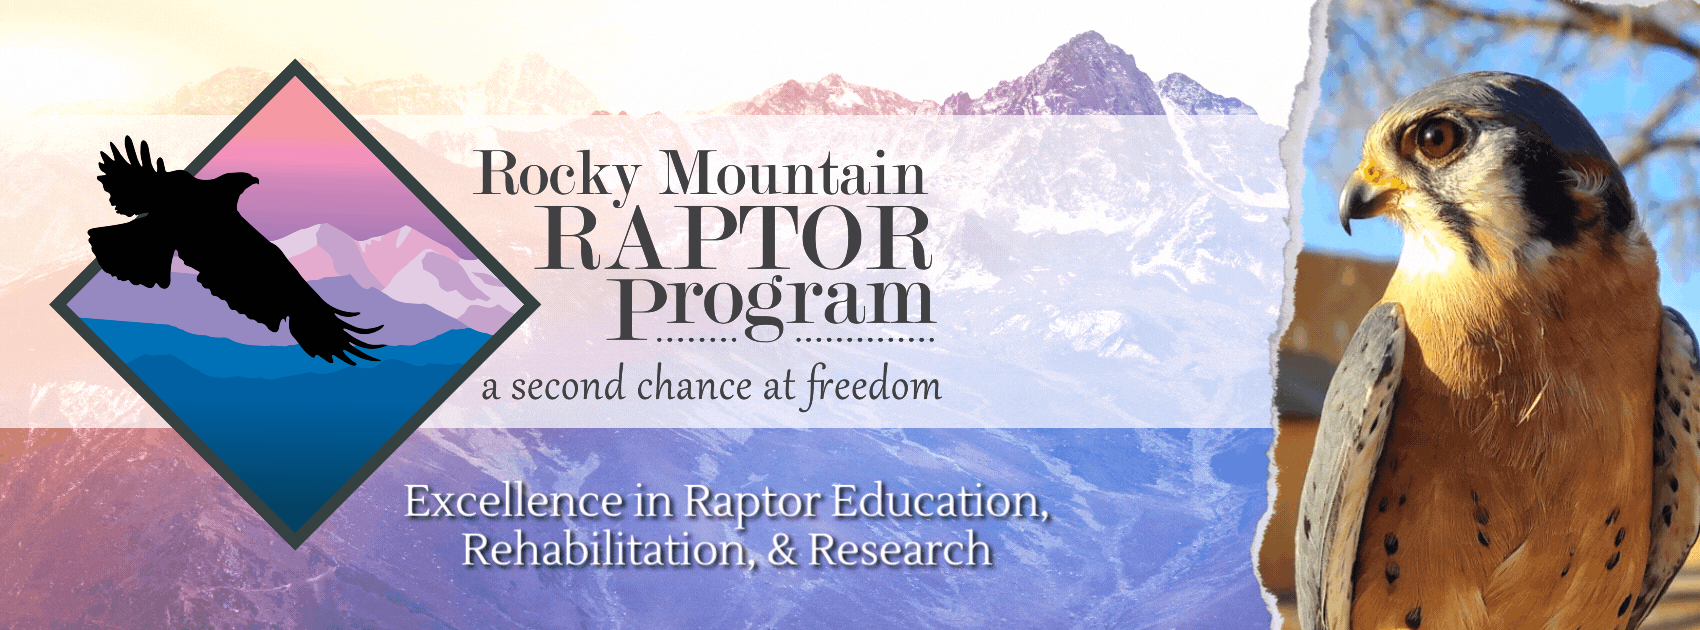 Rocky Mountain Raptor Program: Excellence in raptor rehabilitation, education, and research.